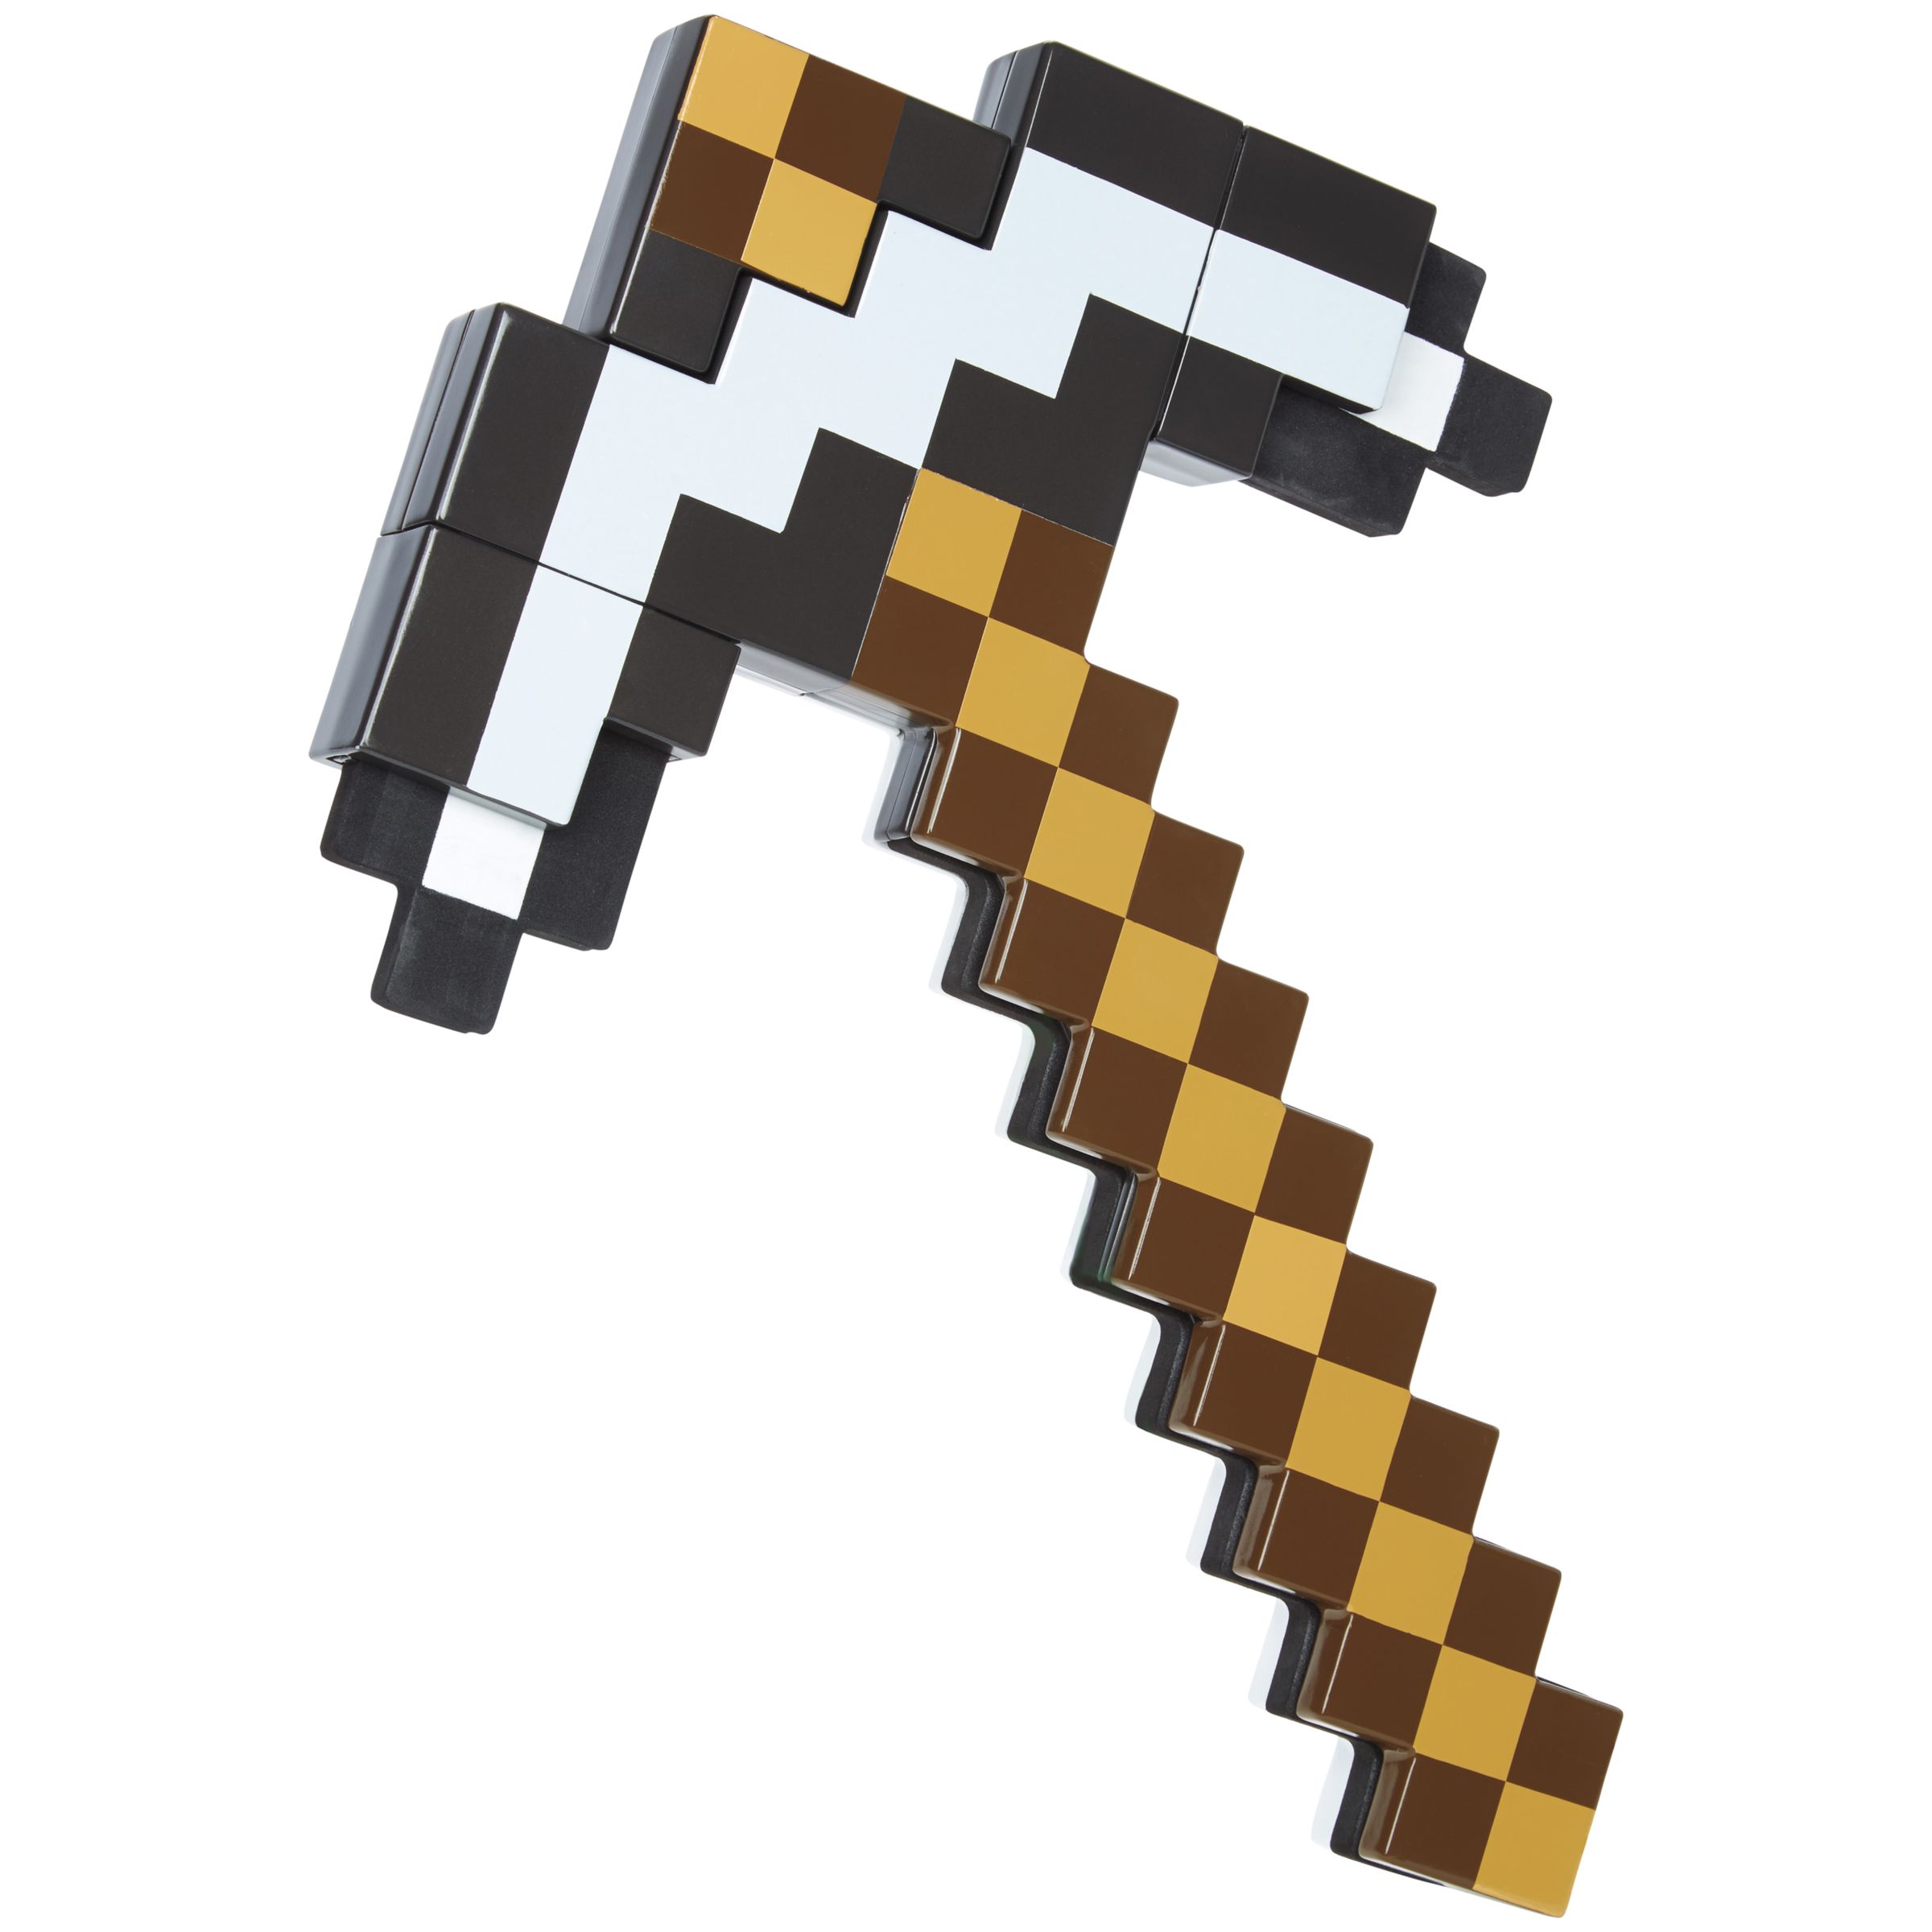 Minecraft Enchanted Sword And Pick Axe 2 In 1 Action Toy At John Lewis Partners